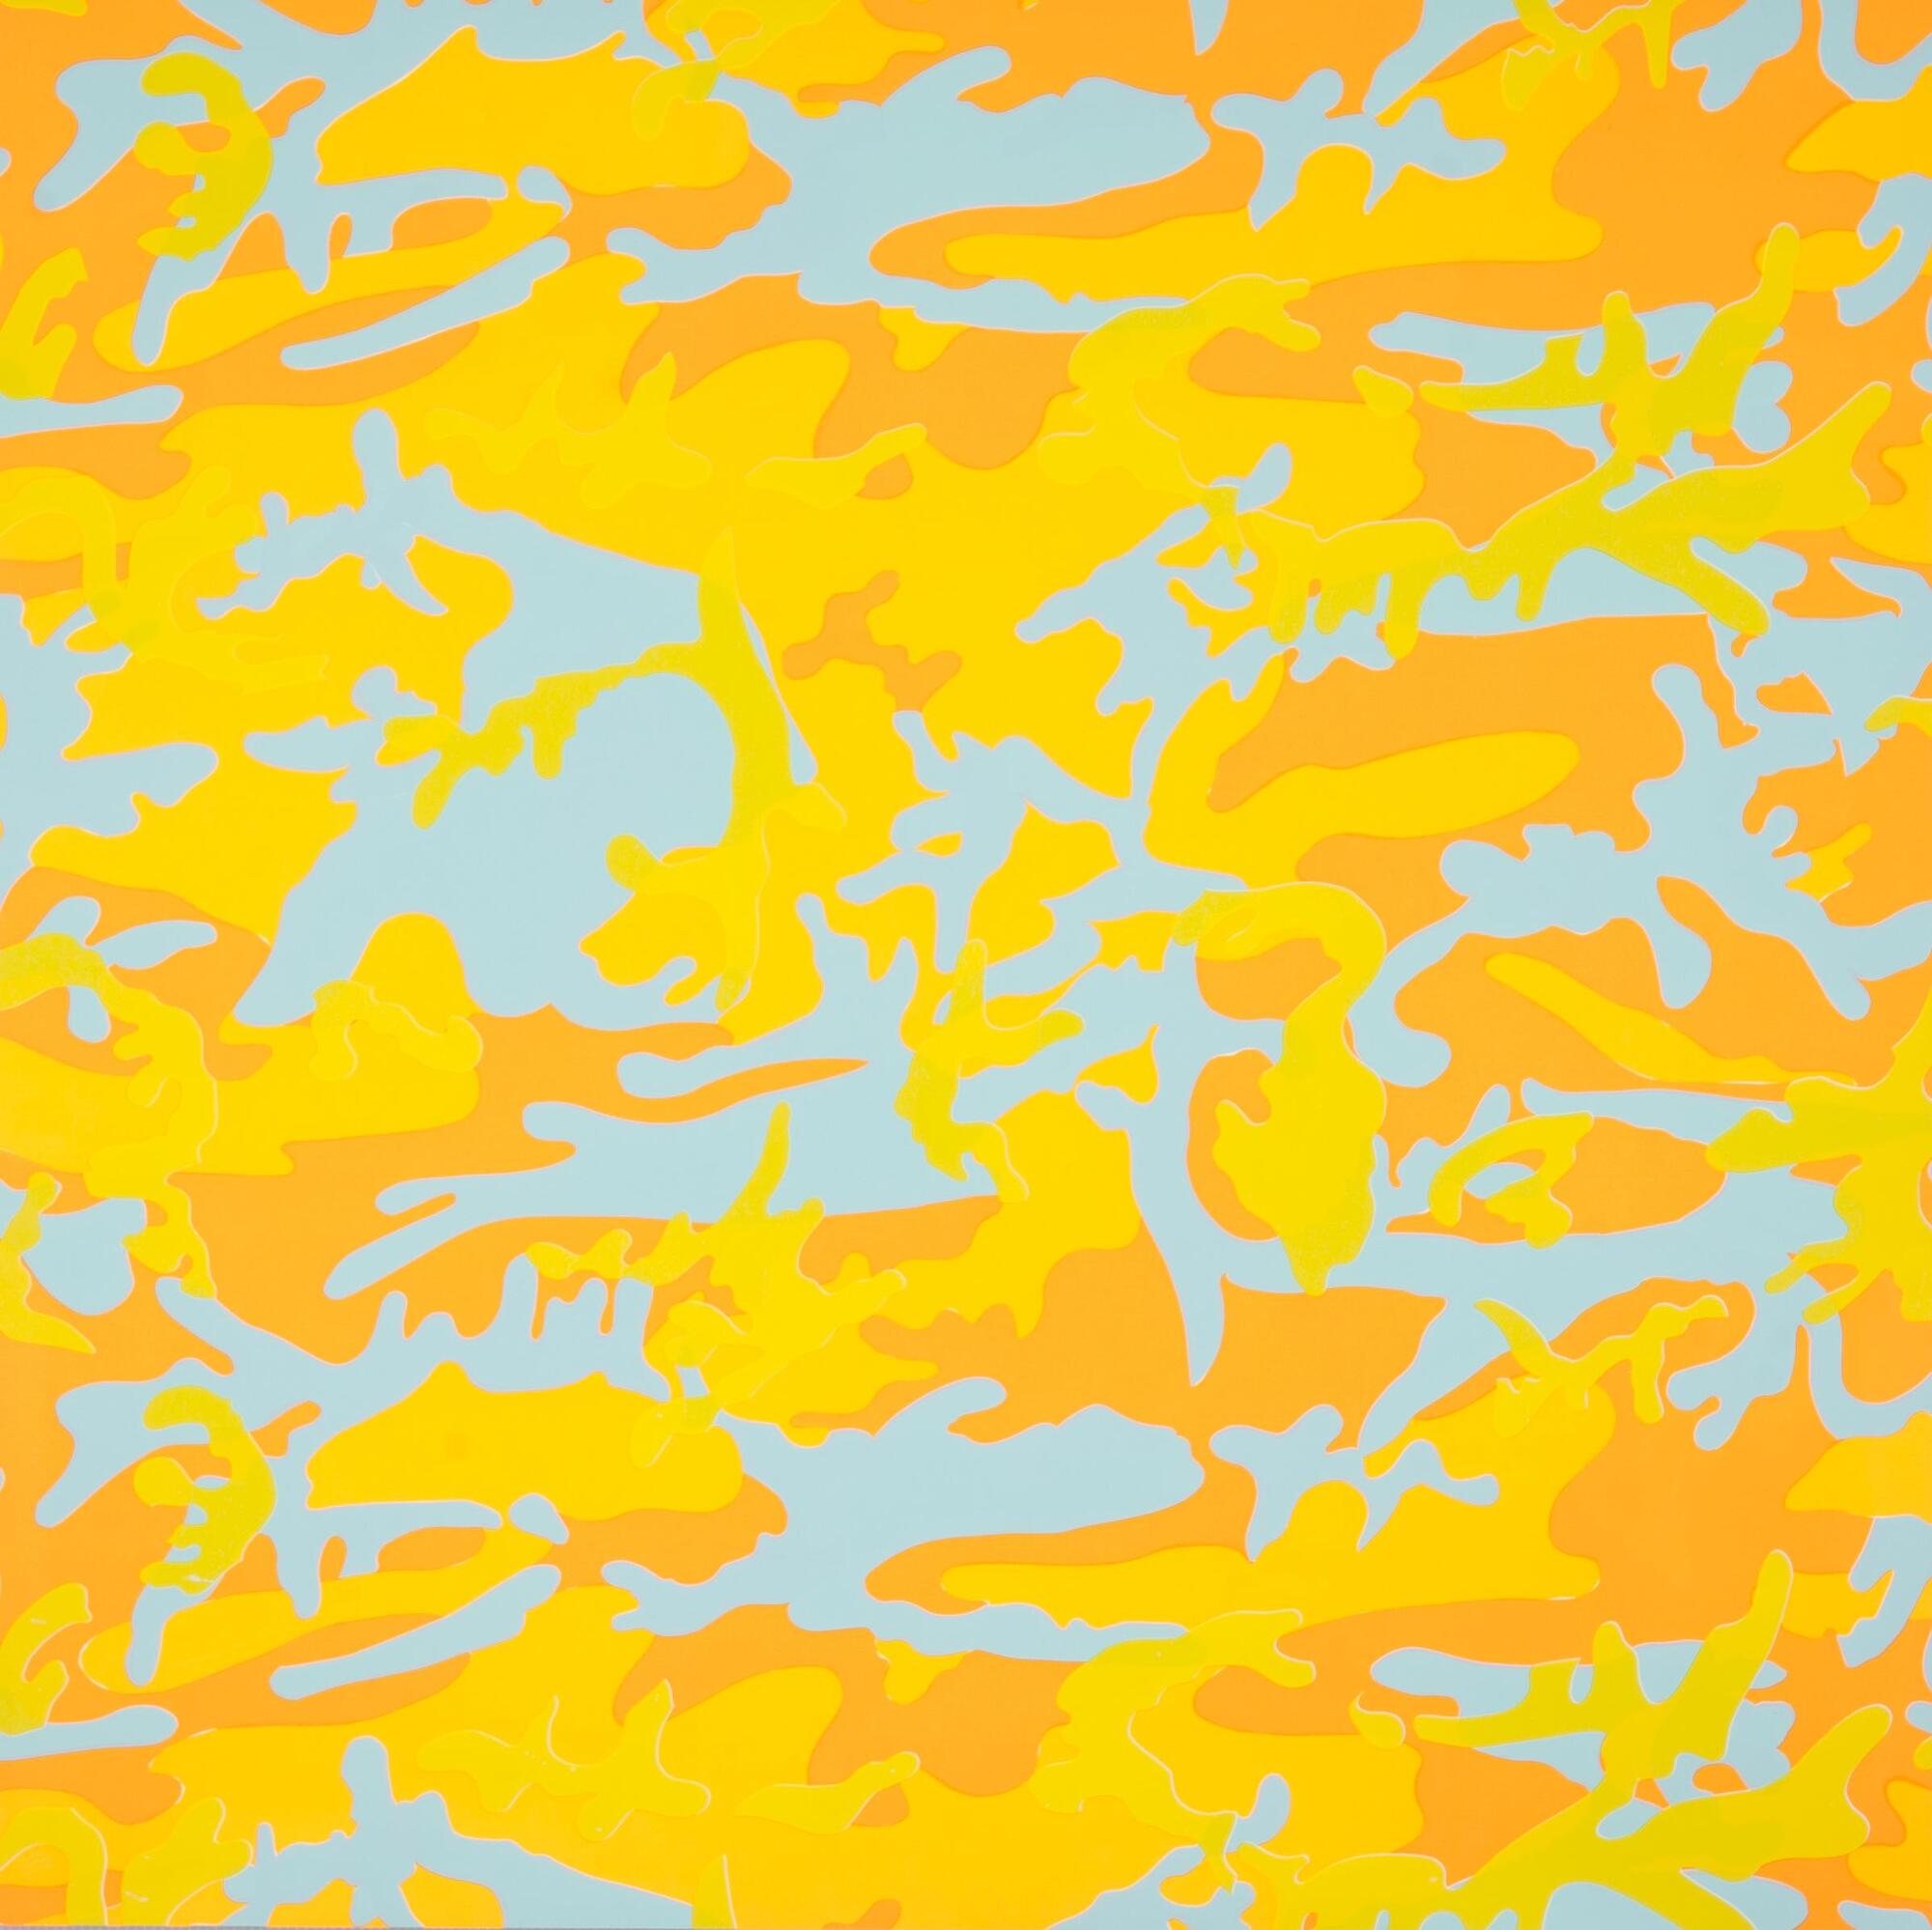 Overall camoflage pattern in bright vibrant florescent tones of blue, orange, yellow and green.